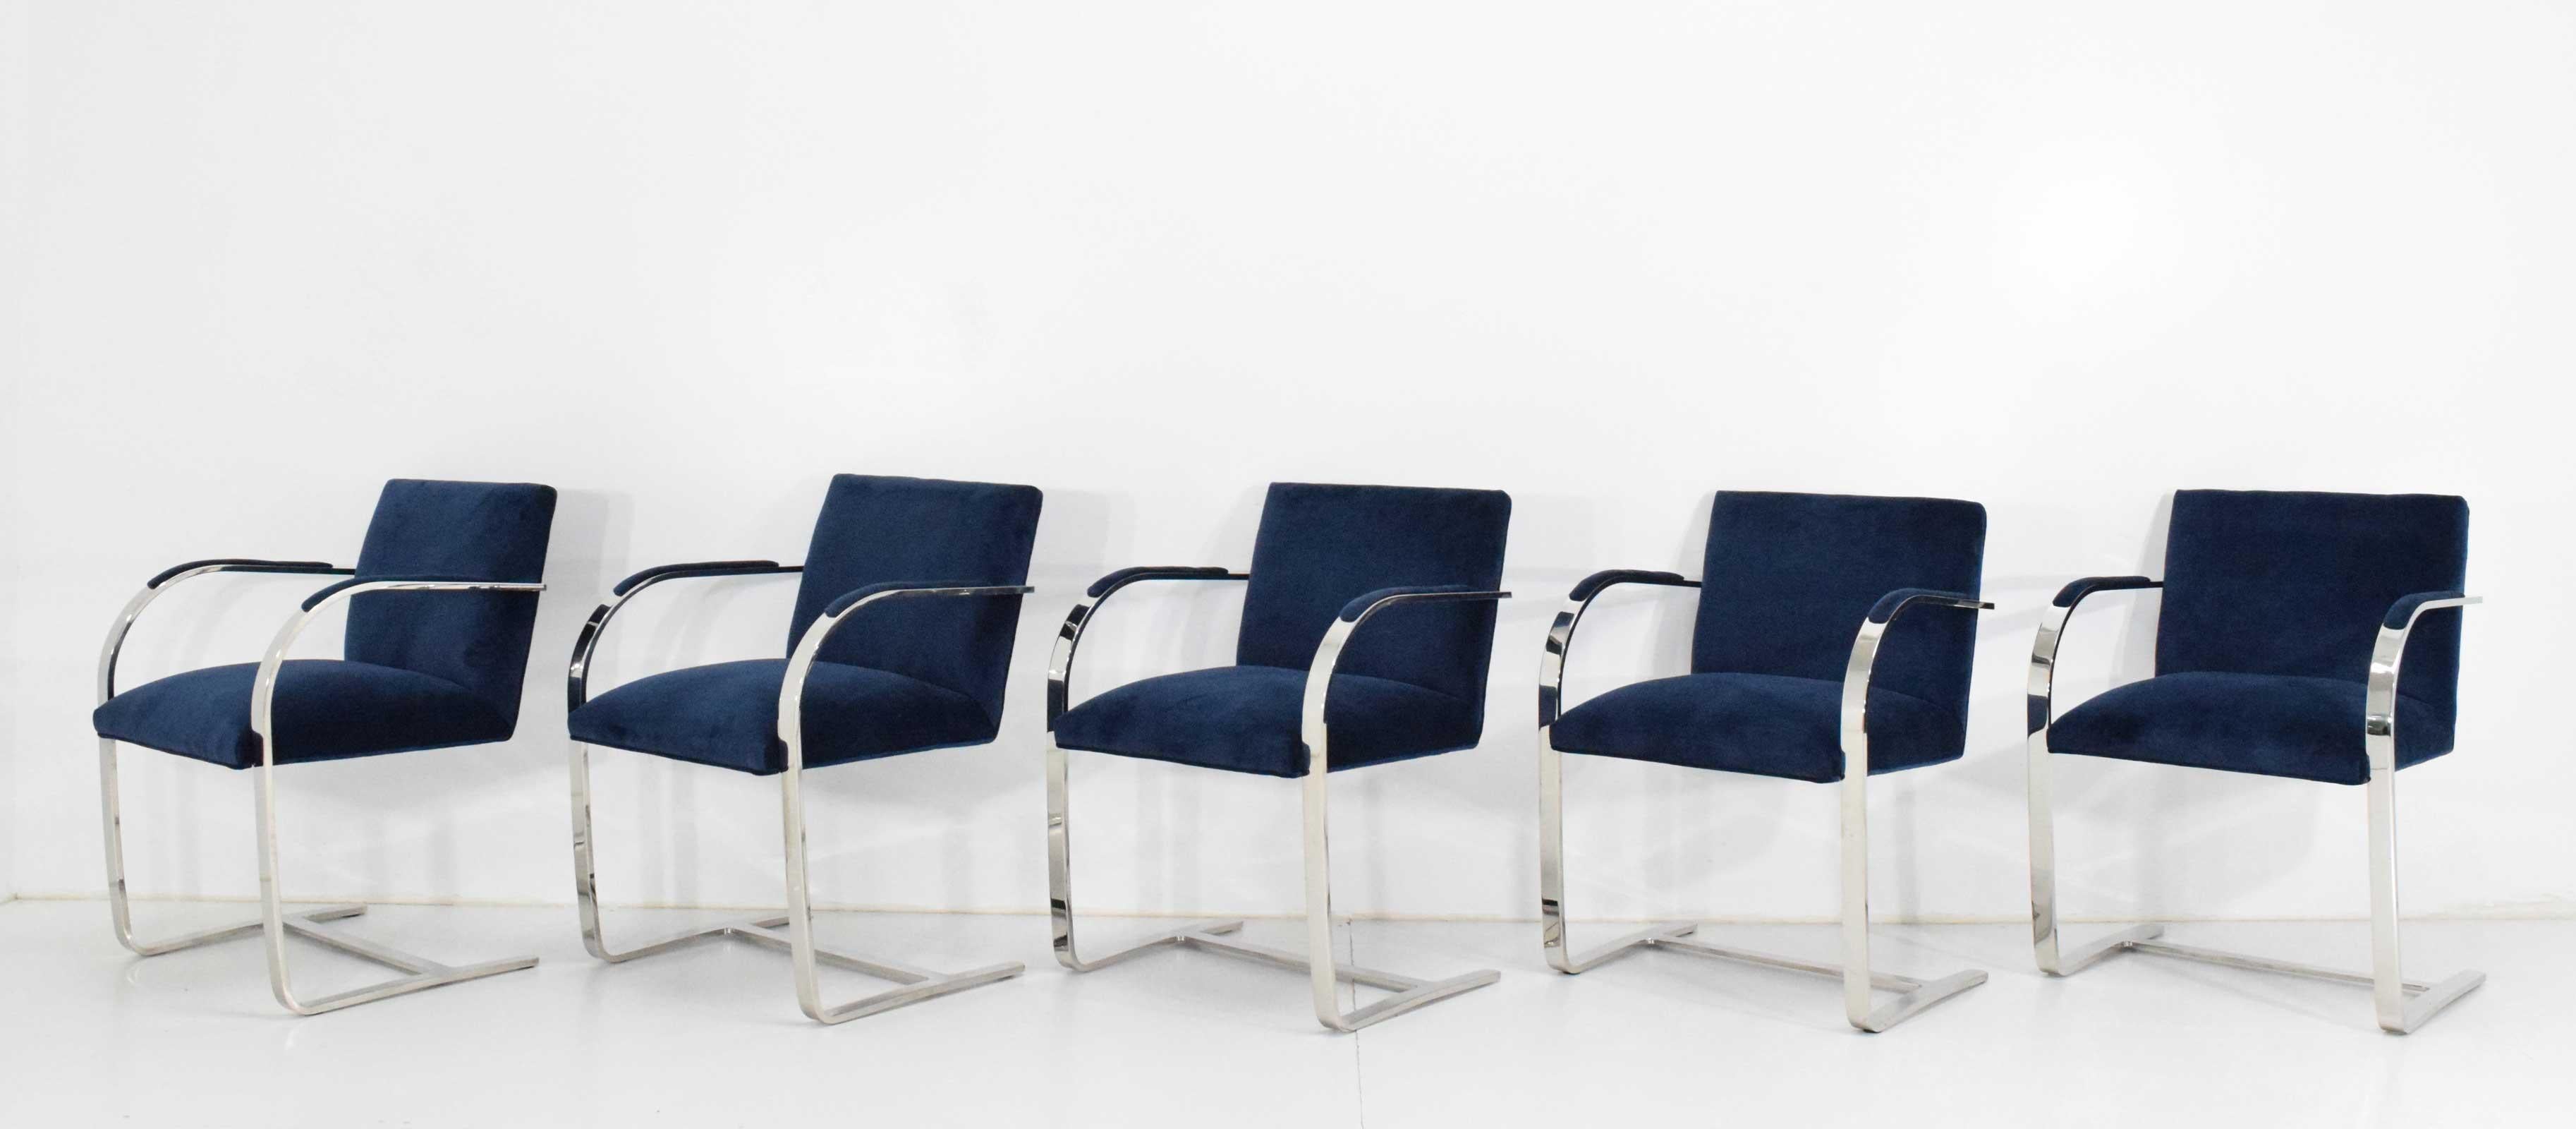 20th Century Stainless Steel Flatbar Brno Chairs by Knoll - ONLY FOUR AVAILABLE